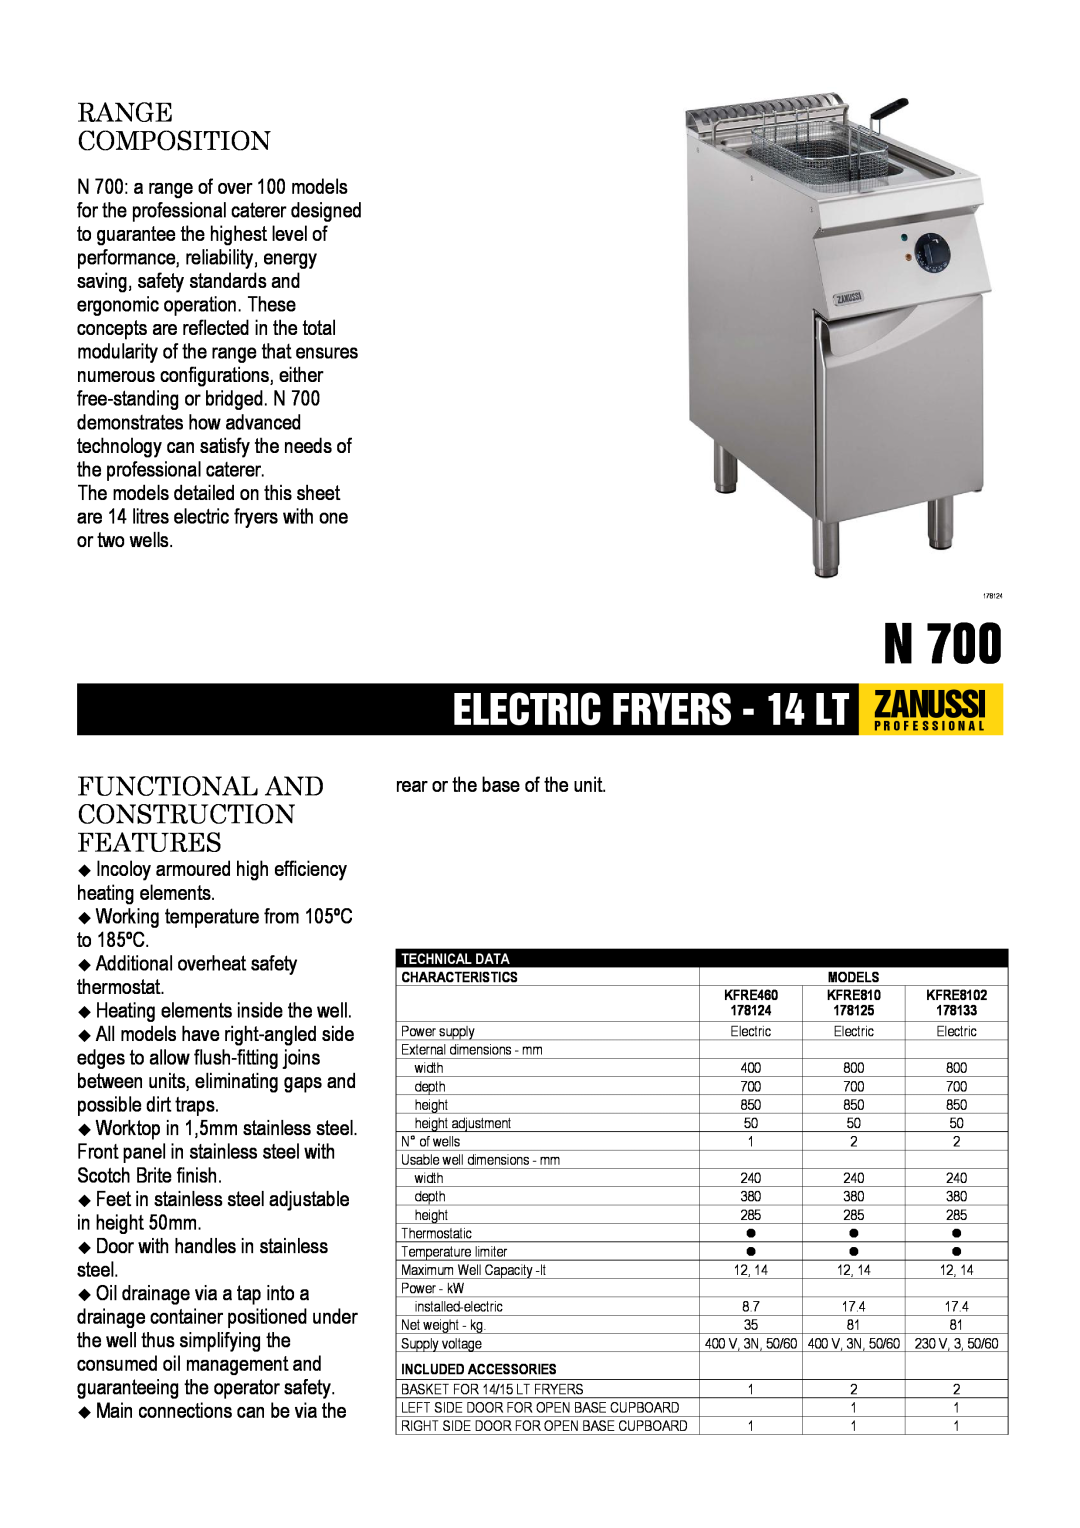 Zanussi 178124 dimensions Range Composition, Functional And Construction Features, Working temperature from 105ºC to 185ºC 